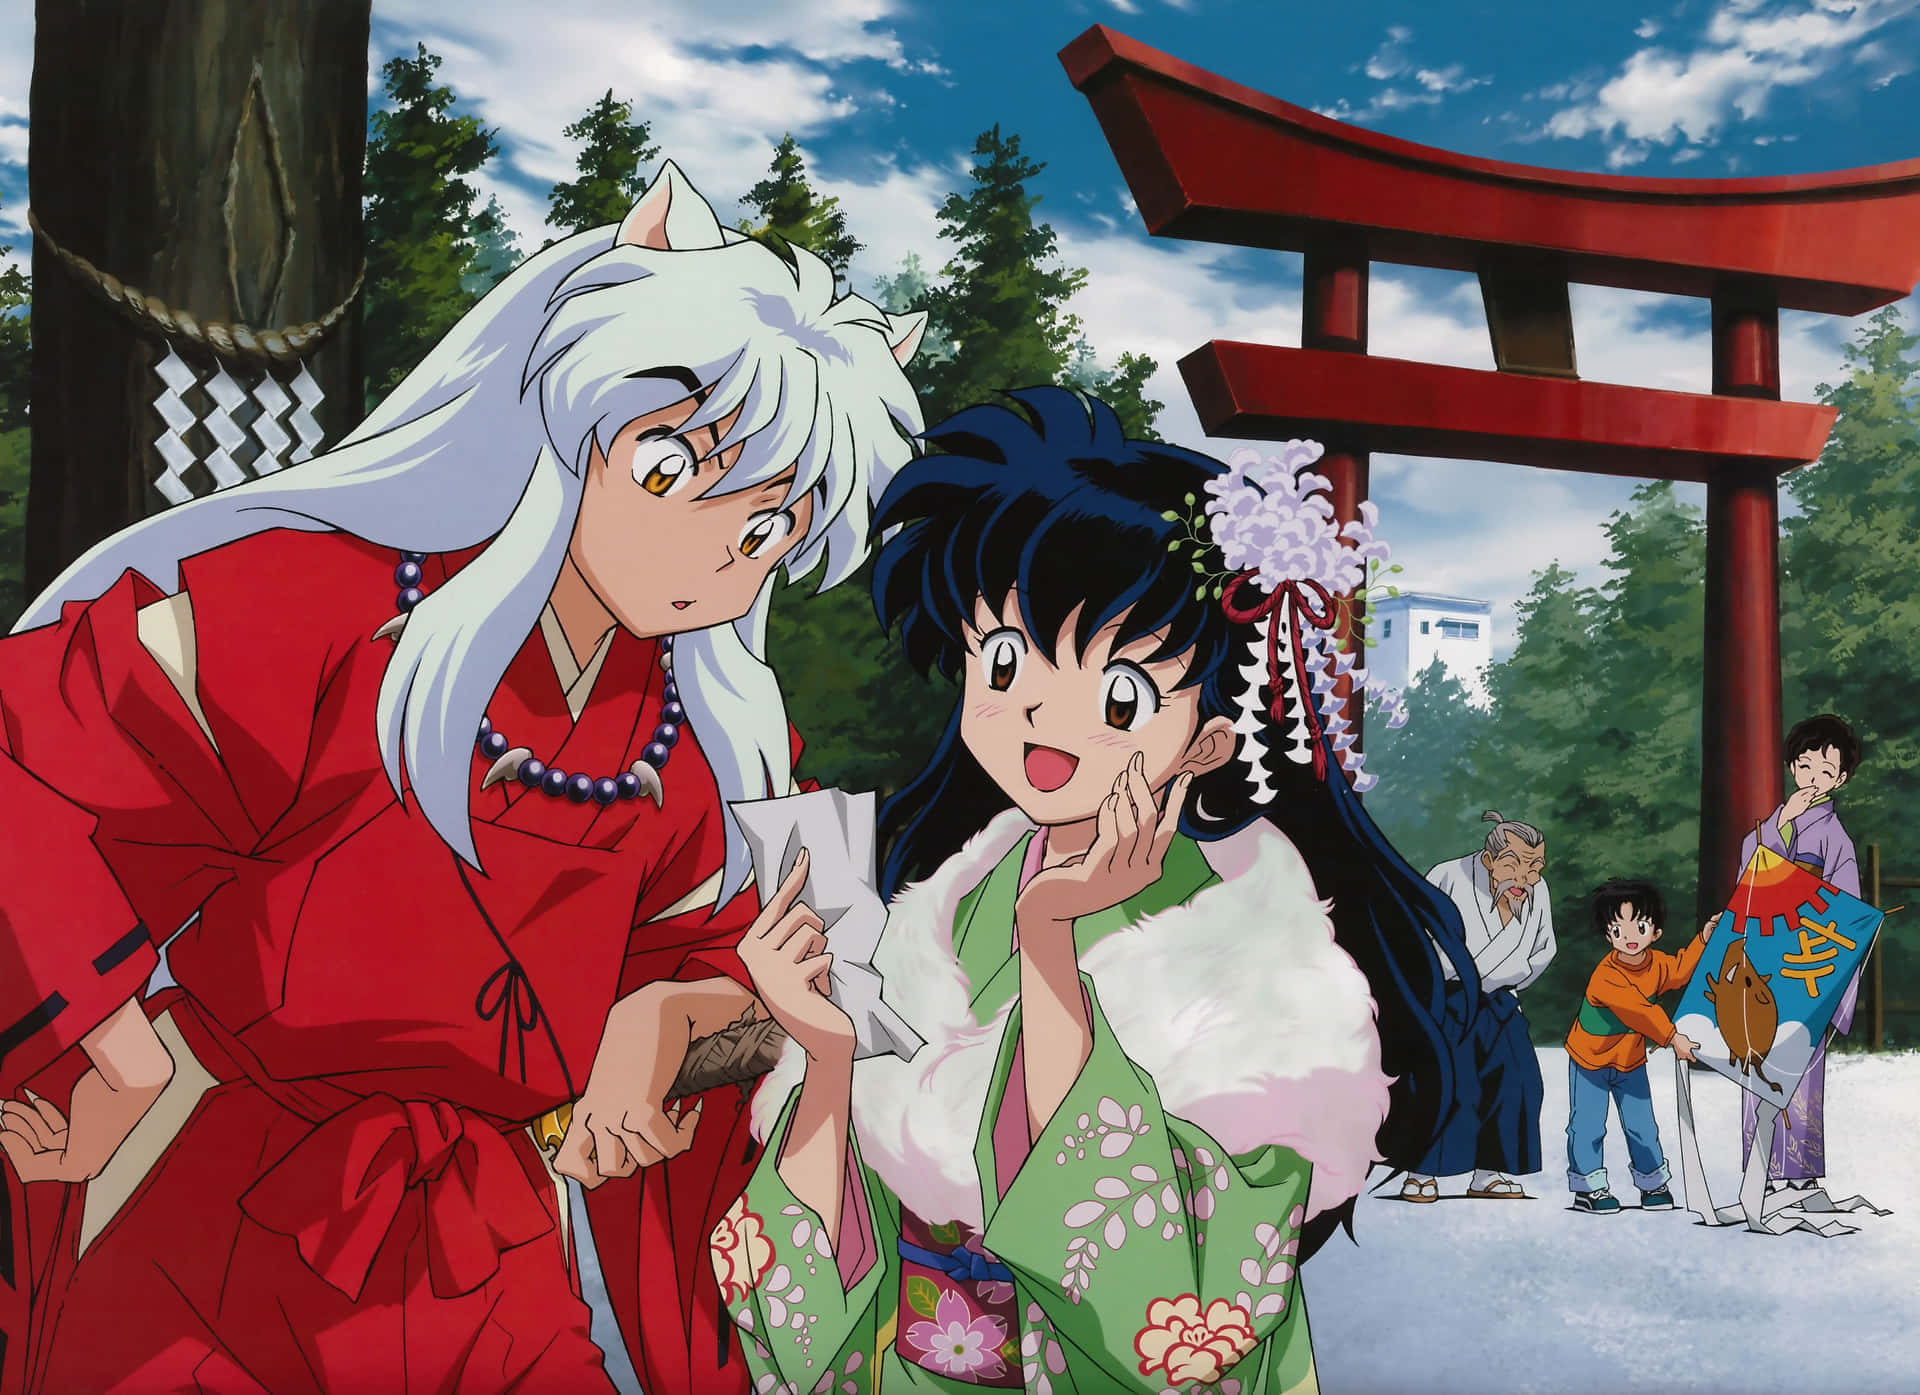 Inuyasha and Kagome Are Still Fighting for the Sacred Jewel